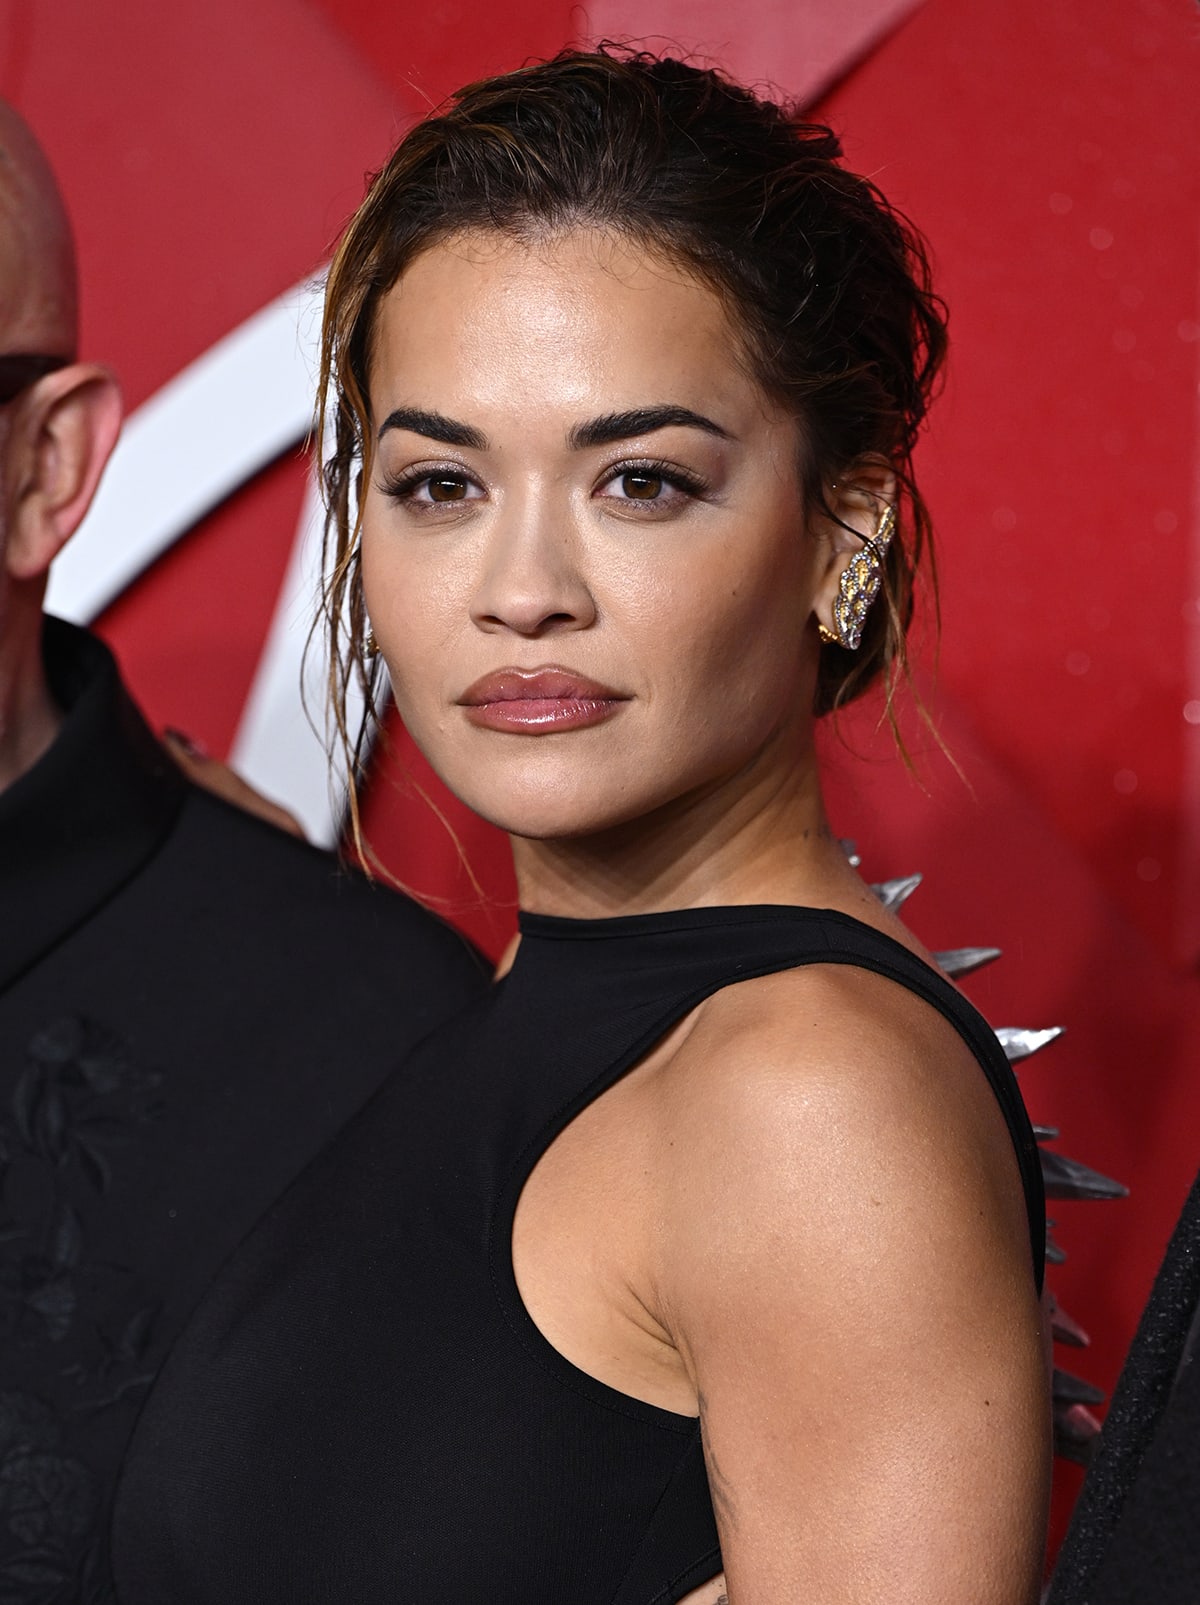 Rita Ora enhances her look with a messy updo, glittery eyeshadow, and mauve lipstick, adding to her glamorous appearance at the Fashion Awards 2023